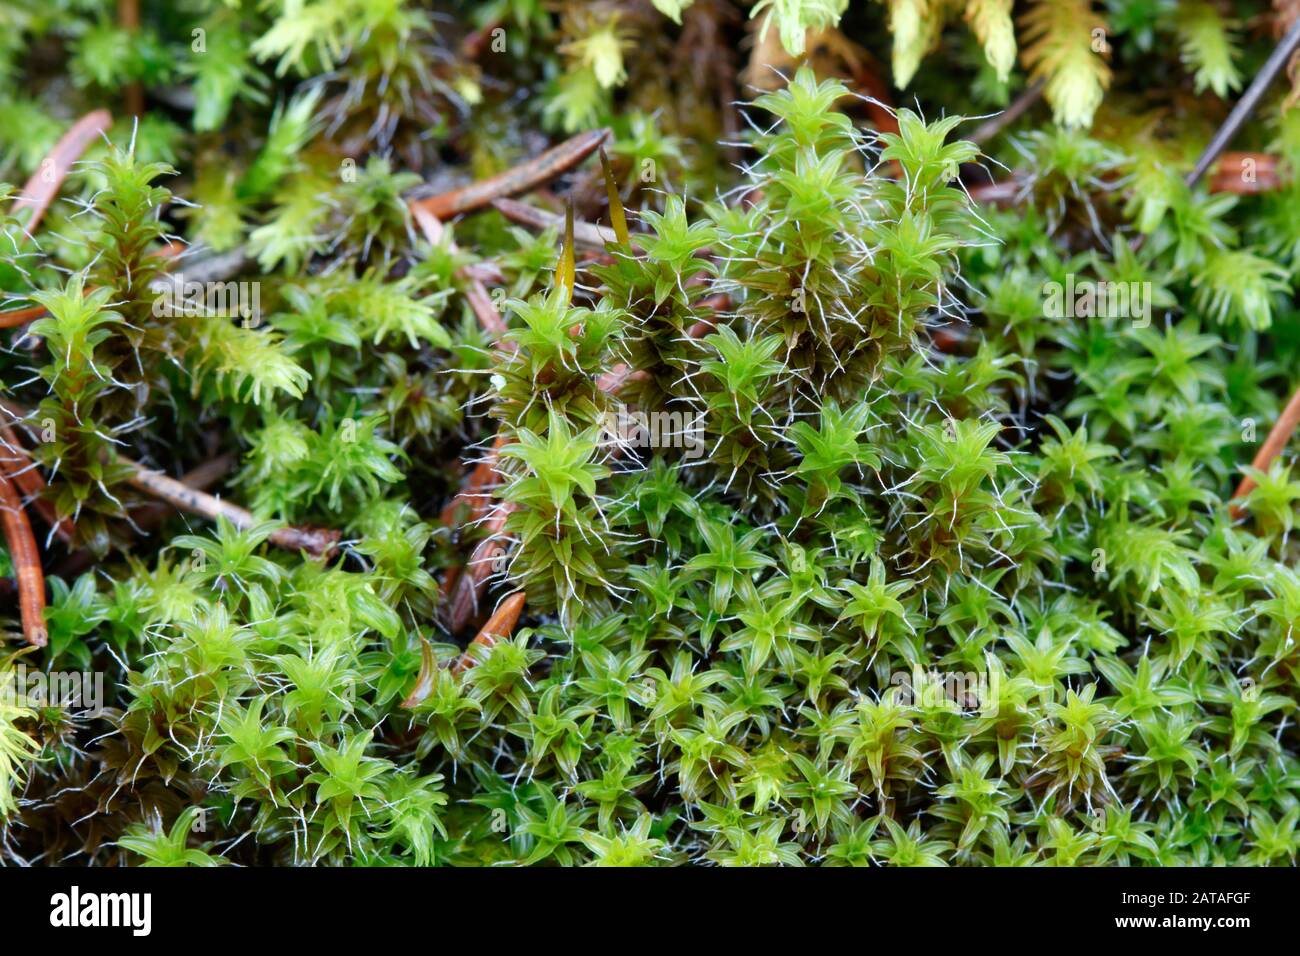 moss in Central Slovakia, Europe Stock Photo